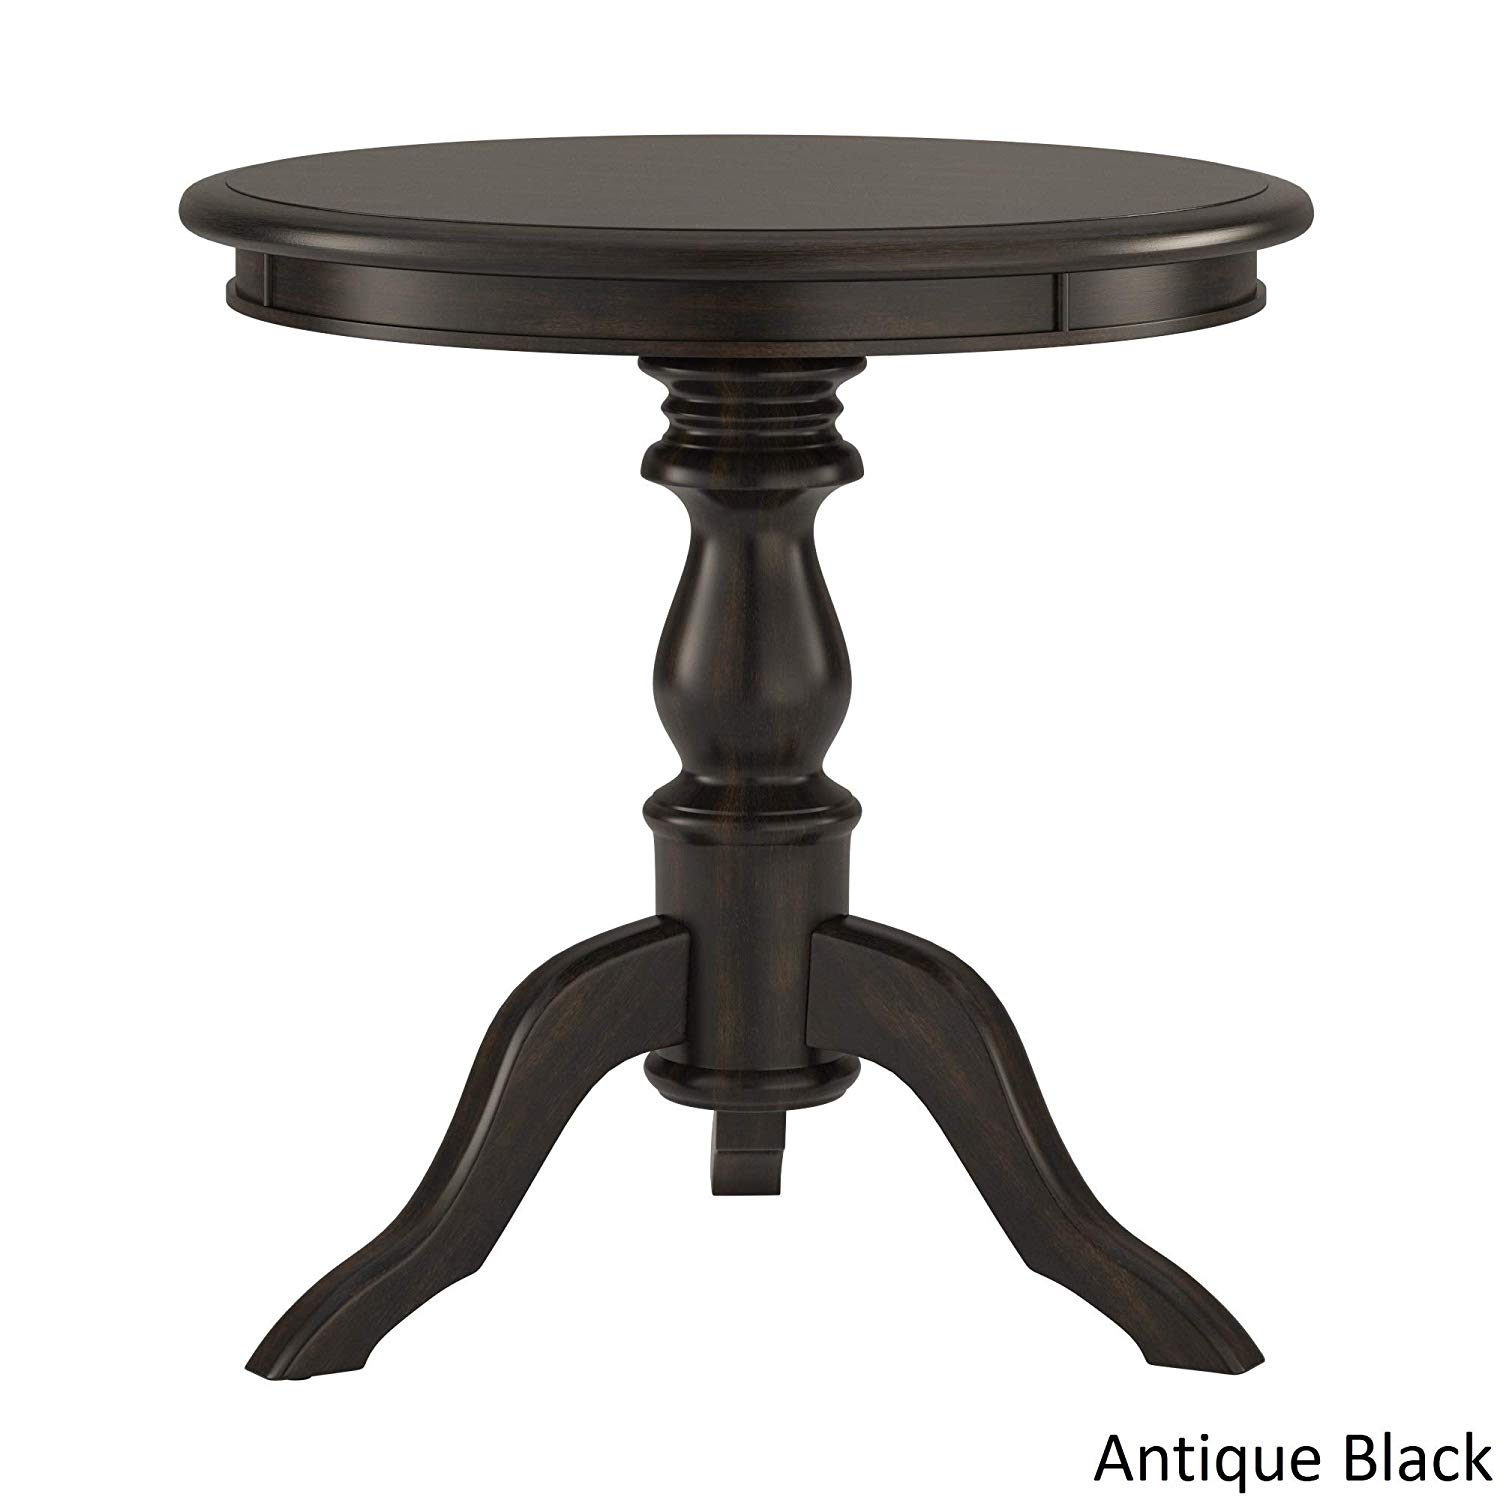 beckett antique wood pedestal accent table inspire metal classic black kitchen dining next armchairs mirror effect bedside tables ikea shelving ideas sofa plans threshold wicker